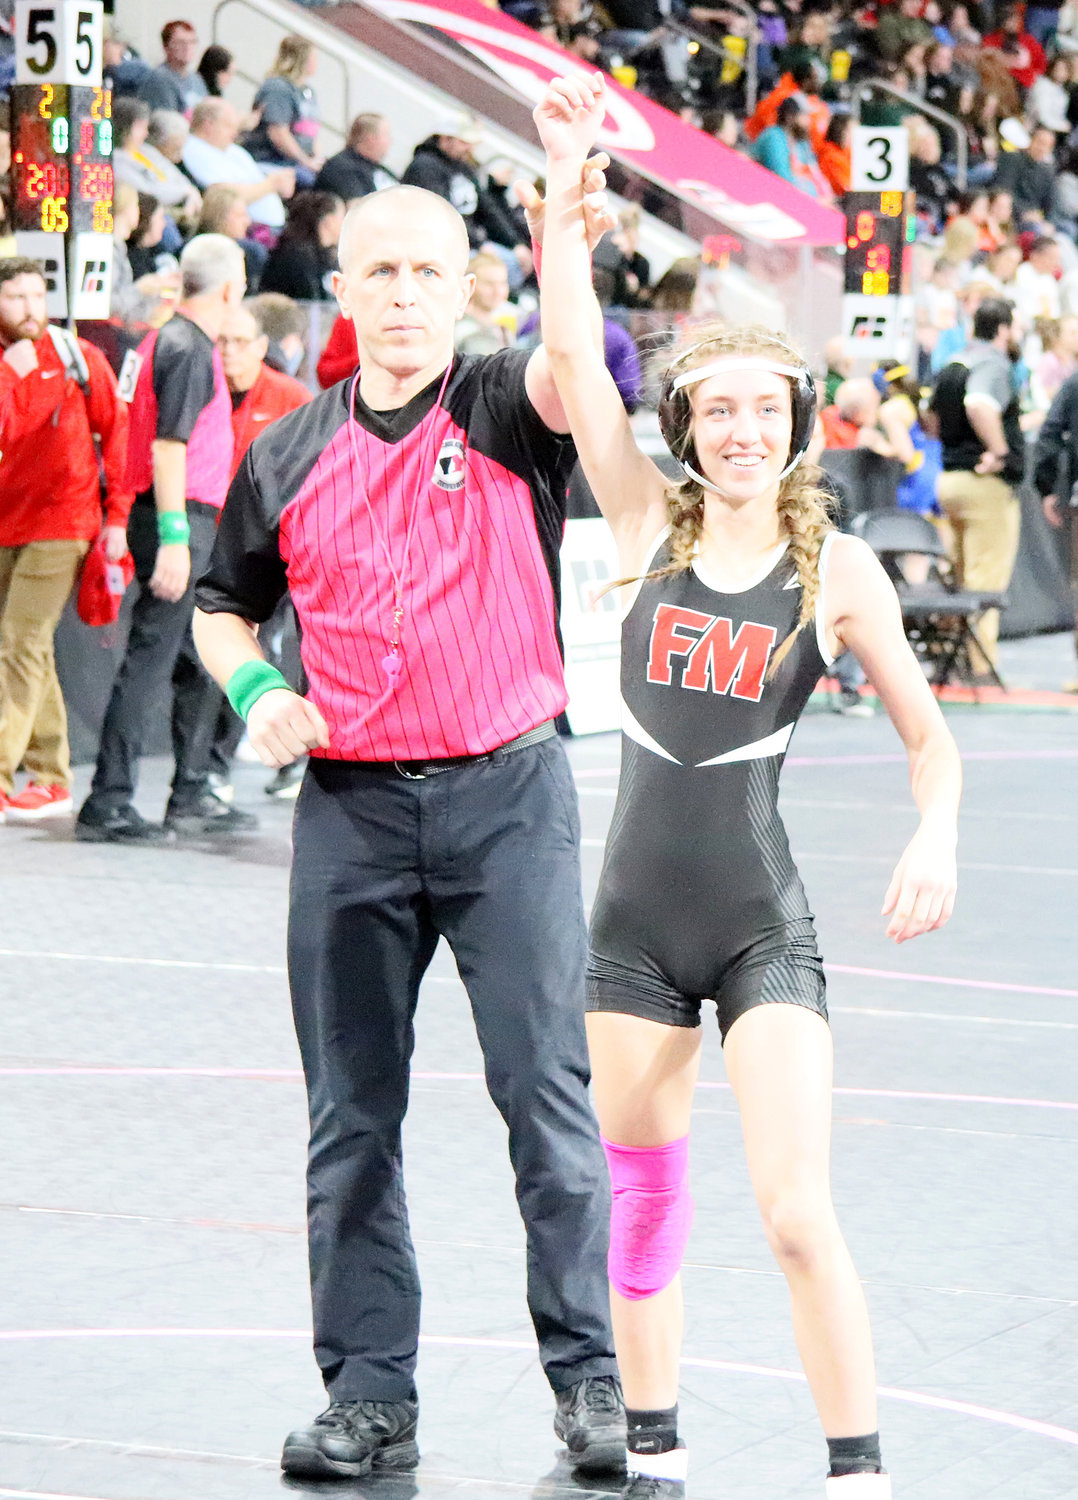 Kemper gets her hand raised after winning in her first ever state tournament wrestling match at the Xtreme Arena in Coralville.